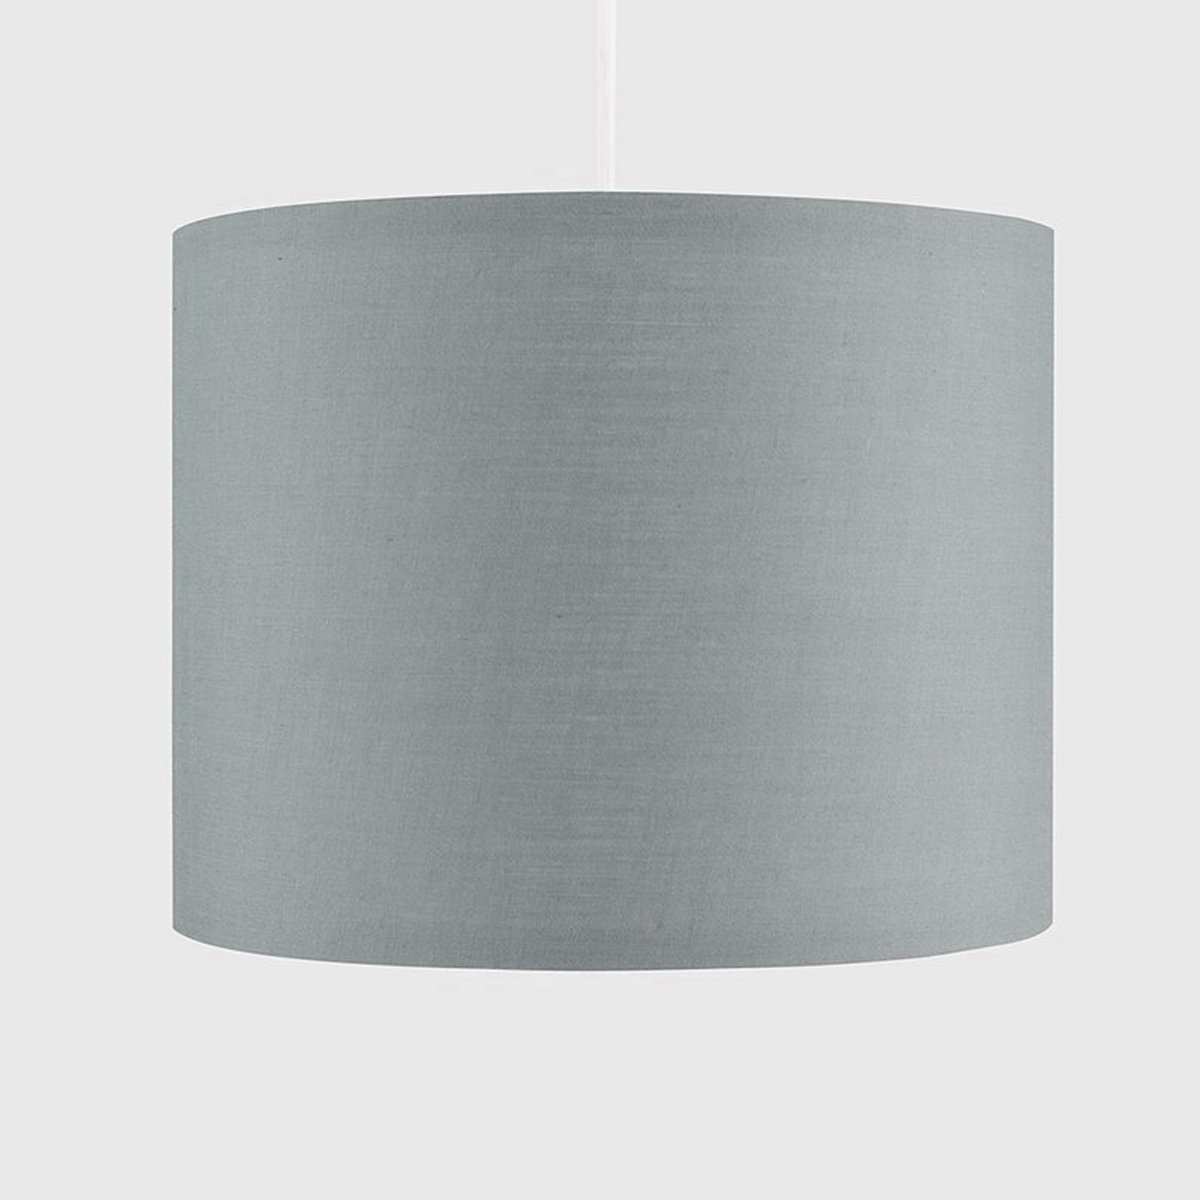 Luxury Pendant Shades – Choice Of Velvet Or Cotton Grey Cotton & Silver – Lamp Shade – CGC Retail Outlet